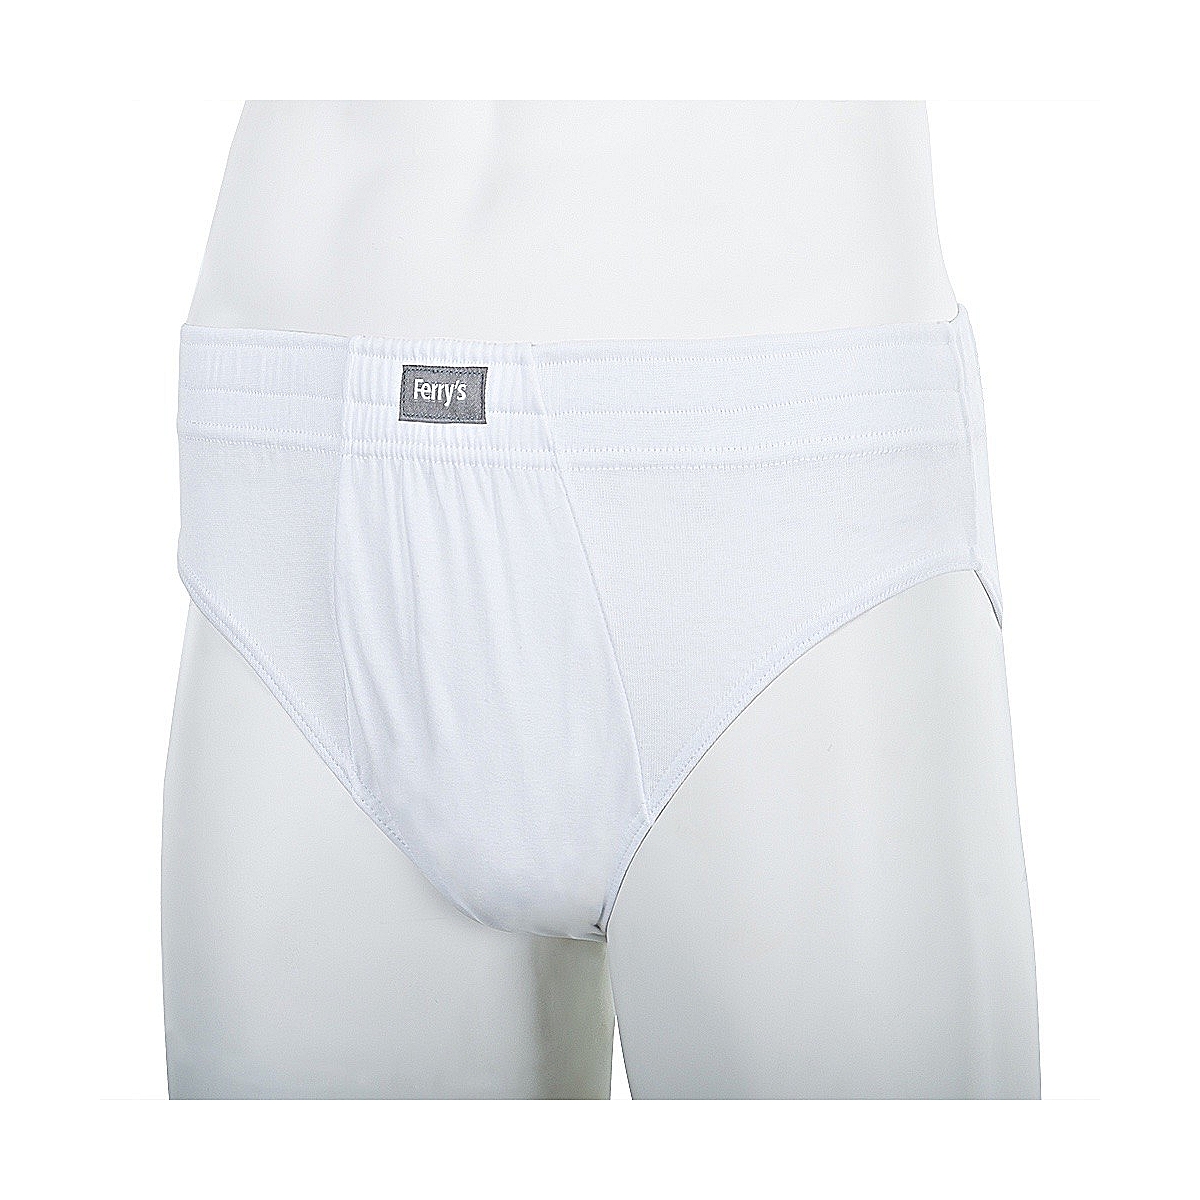 Buy Ferry's 5403 RIBBED & PLAIN CLOSED BRIEF. THIN FABRIC